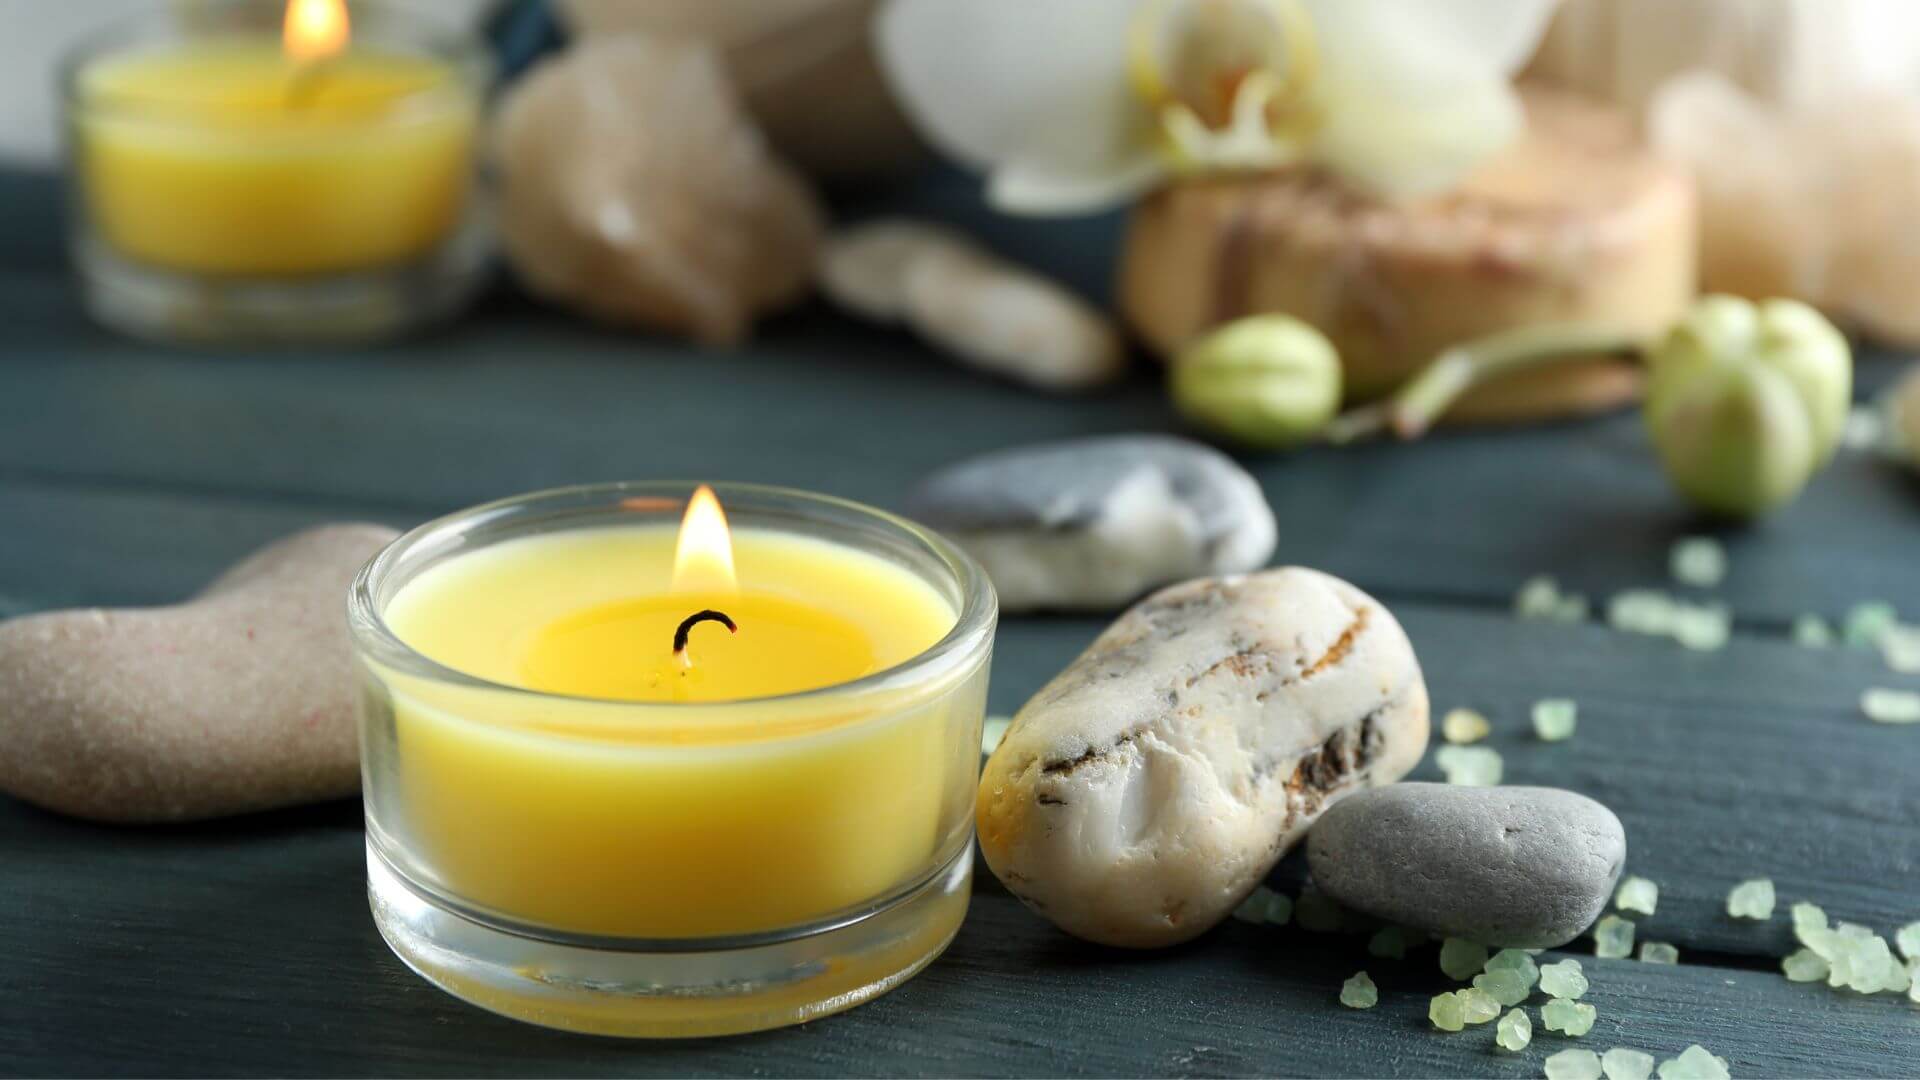 Beeswax Candle Care: A Guide to Caring for and Burning Beeswax